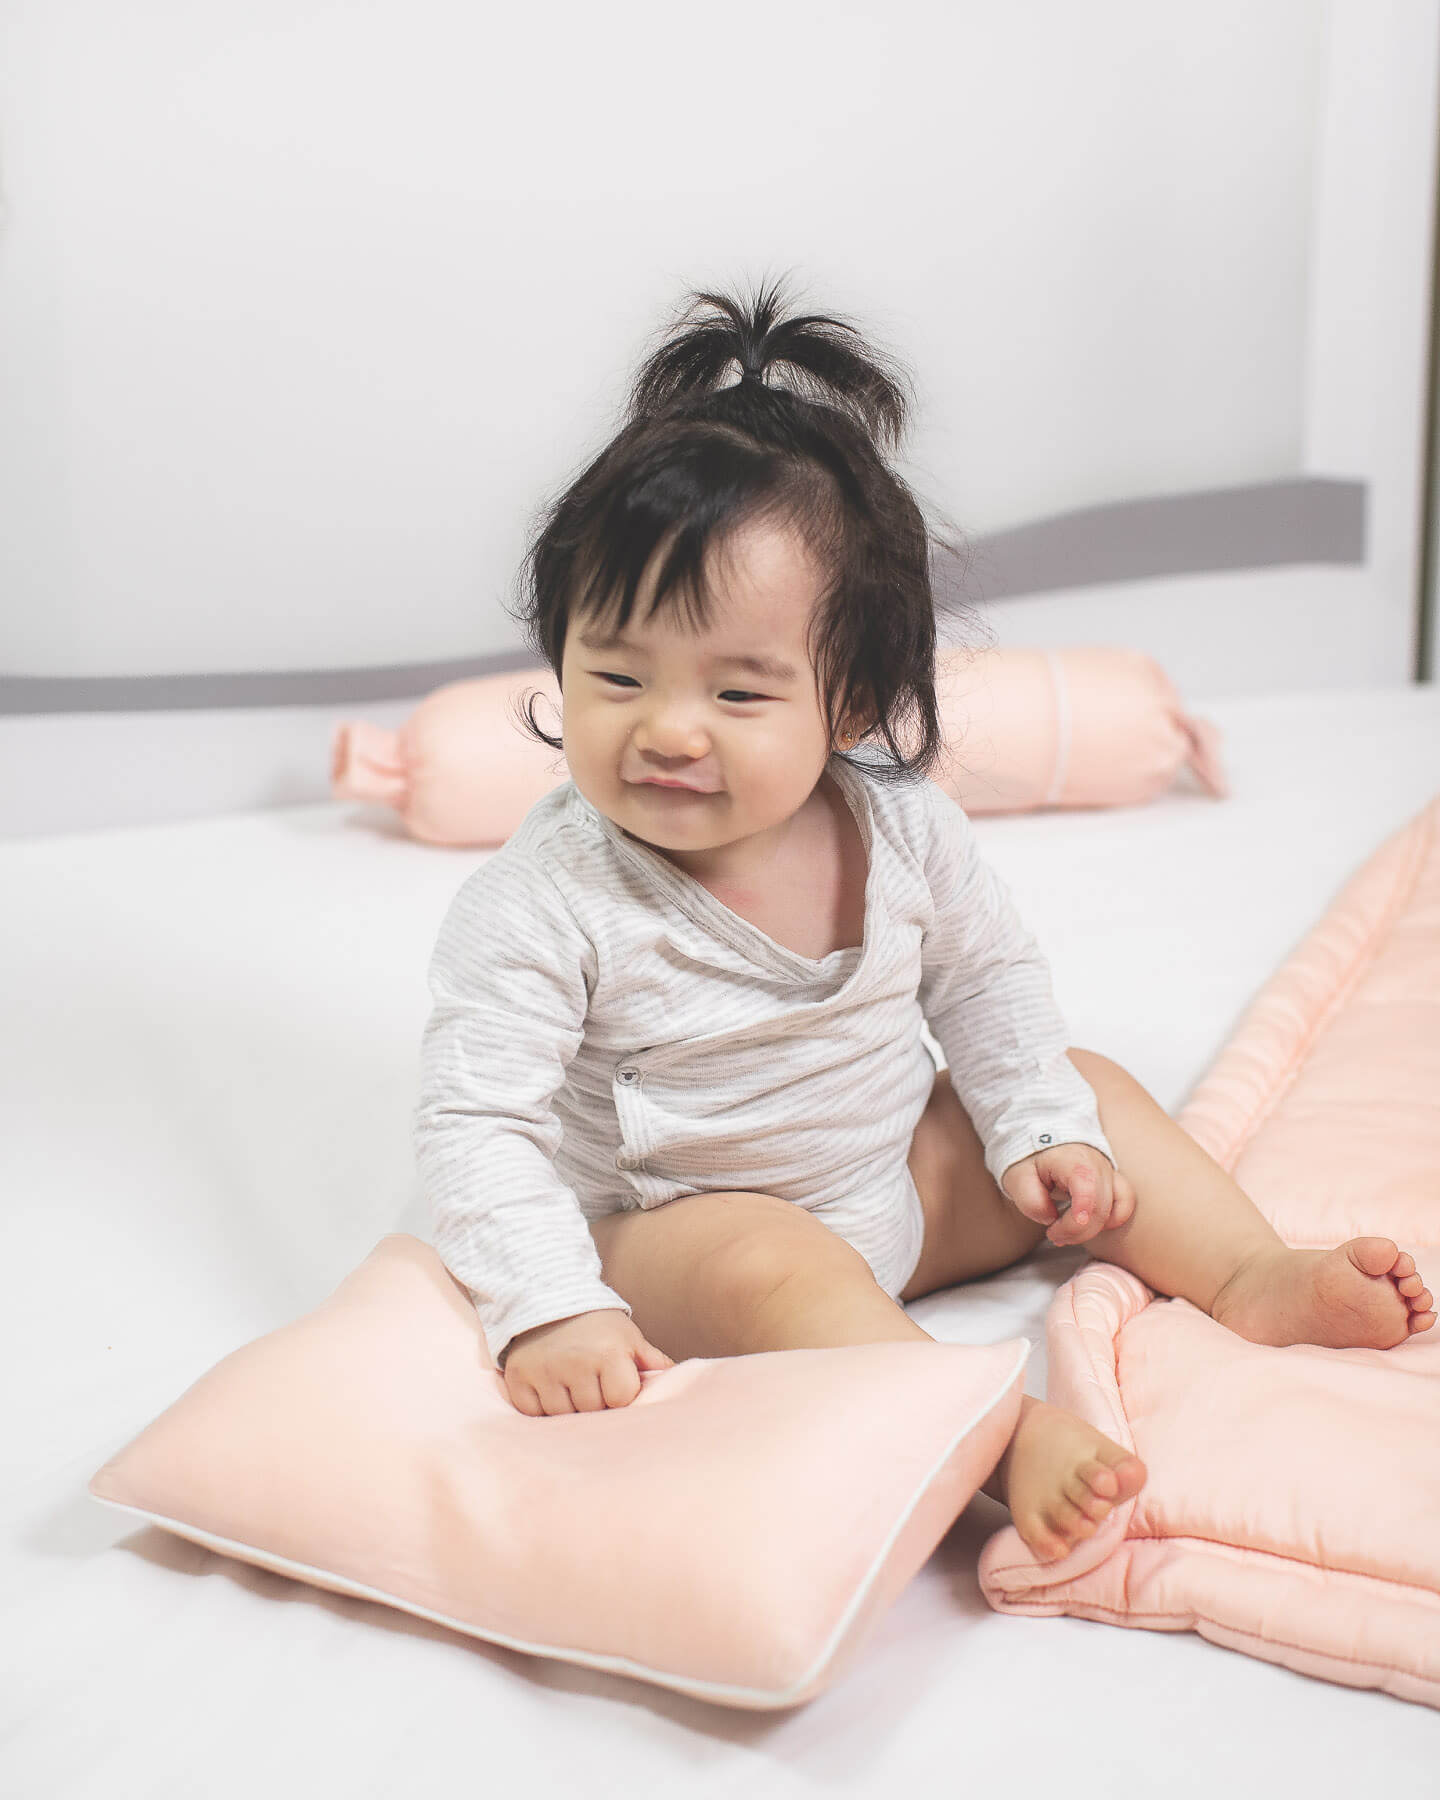 baby holding organic bamboo lyocell baby pillowcase set - pillowcase, 2 bolstercases in daydream blush (pink with white piping)